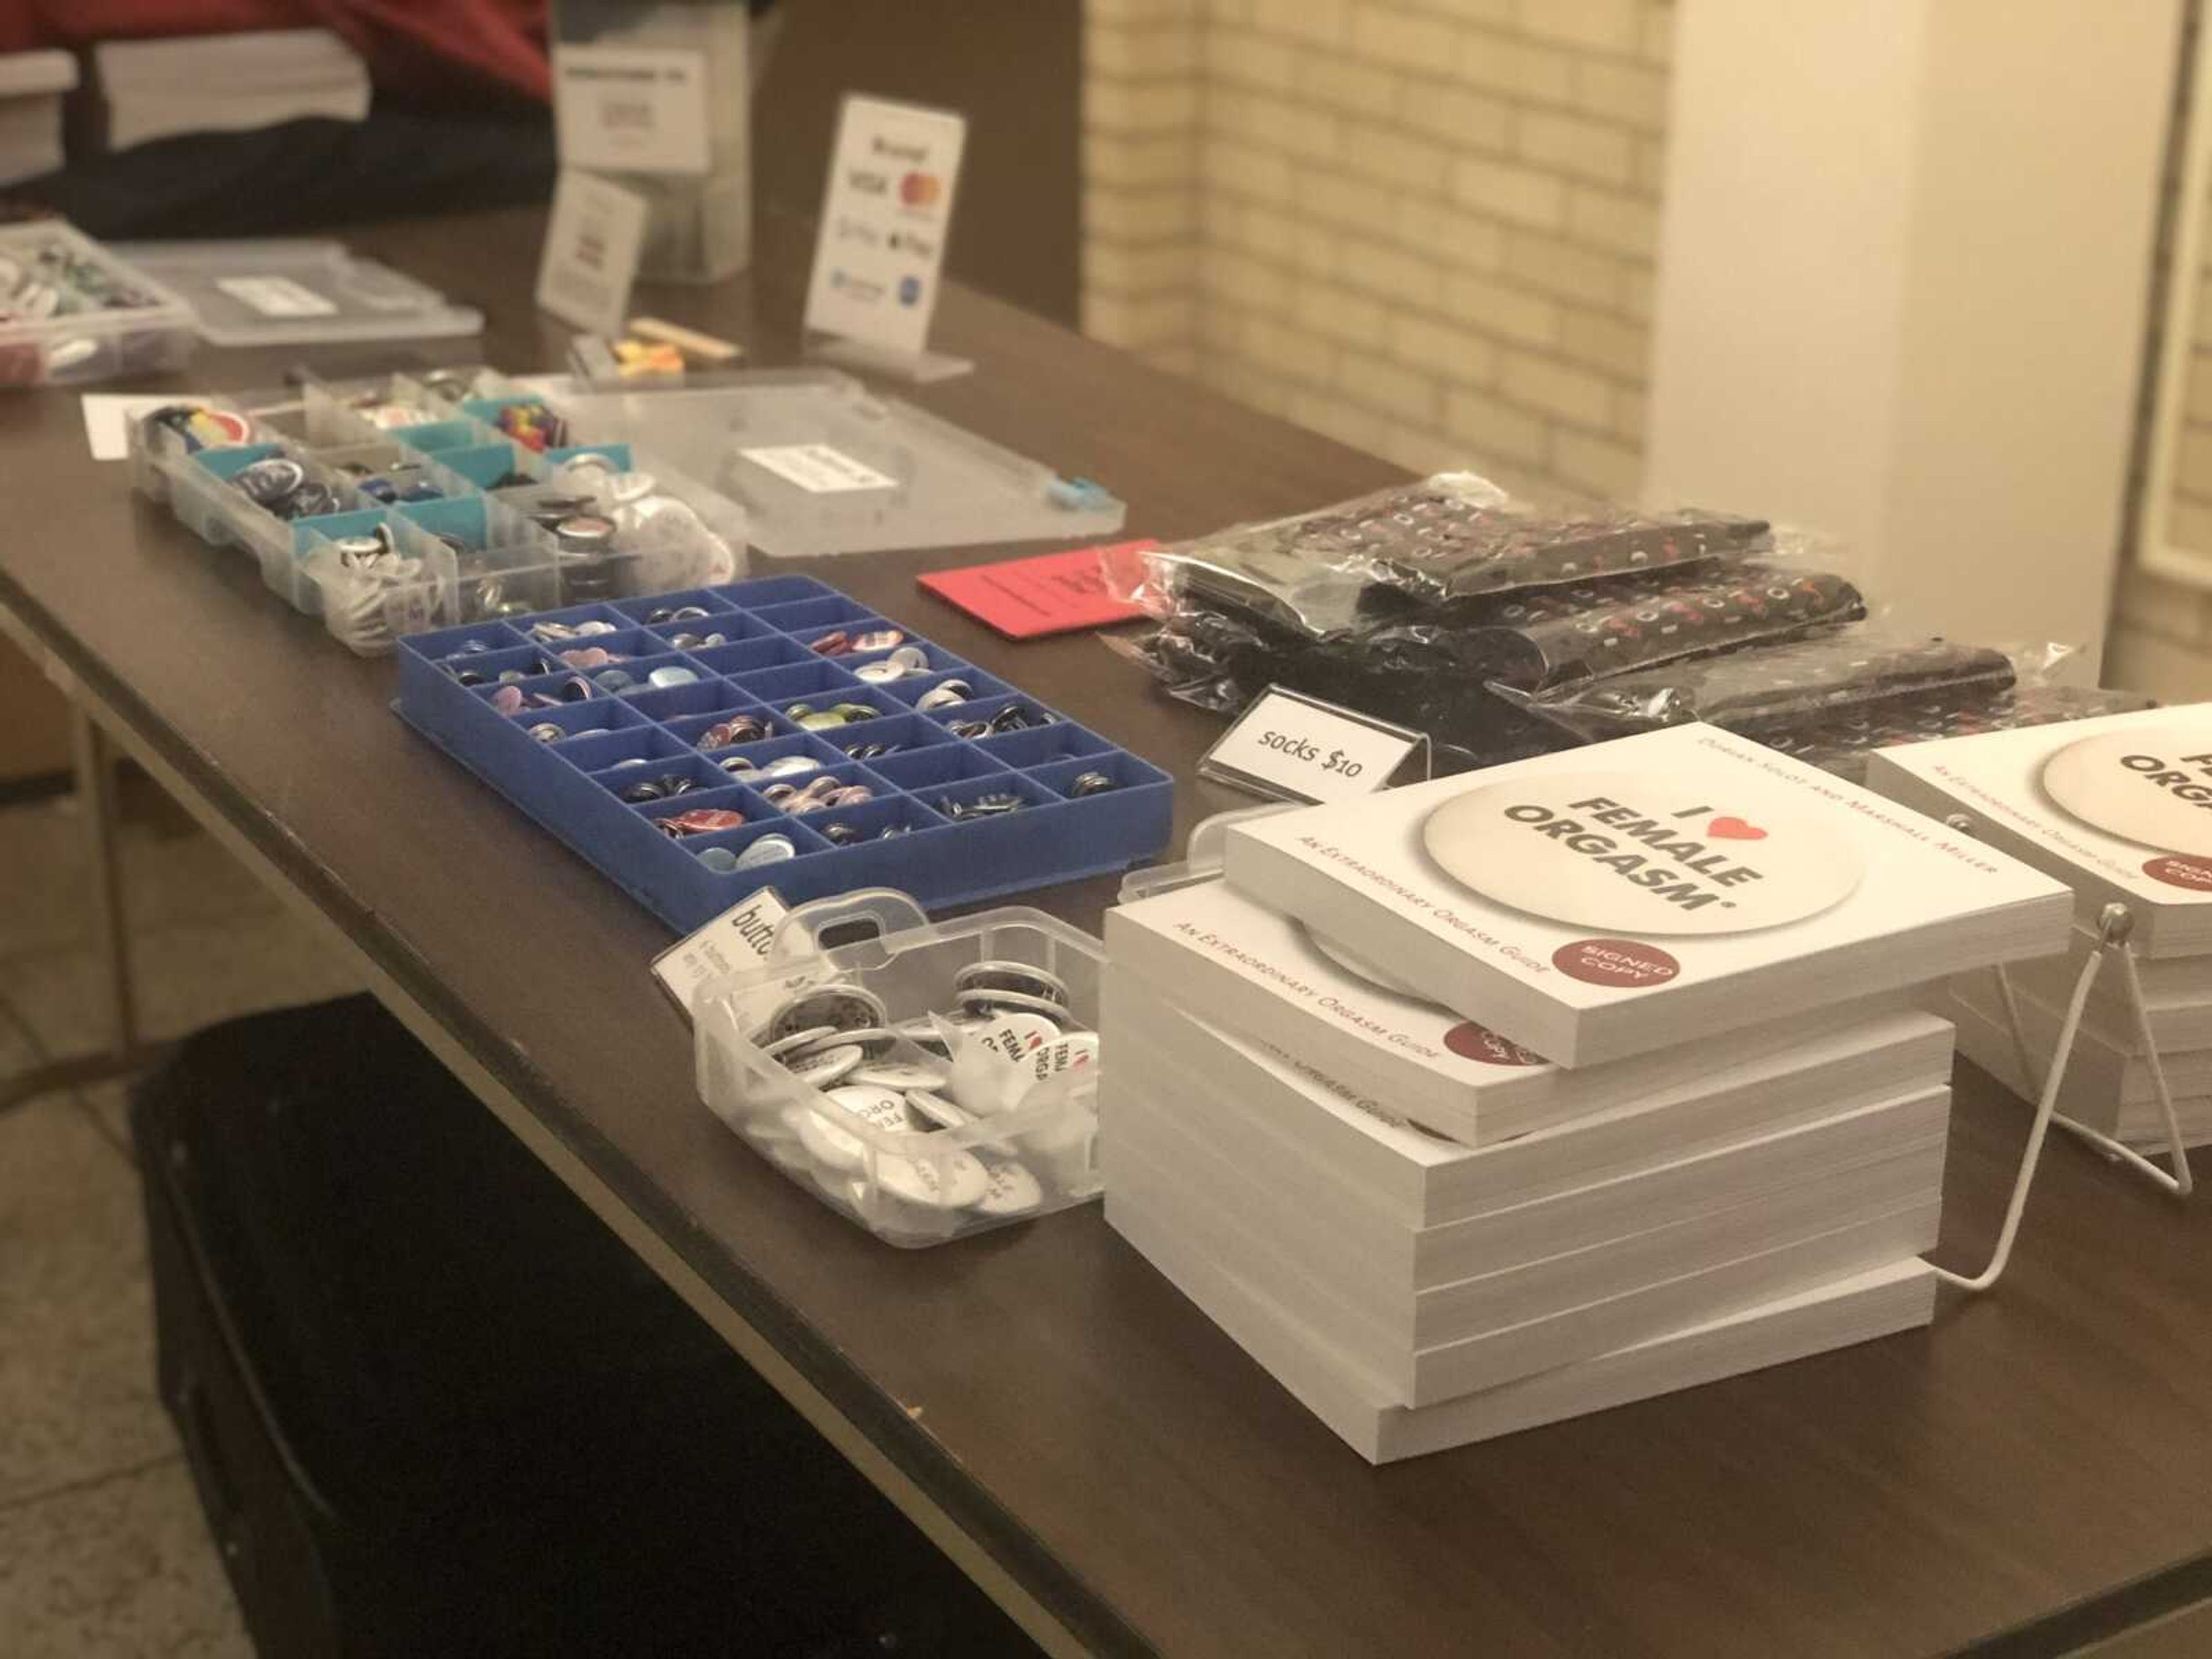 Merchandise was available for purchase at the event, including books, socks and buttons.